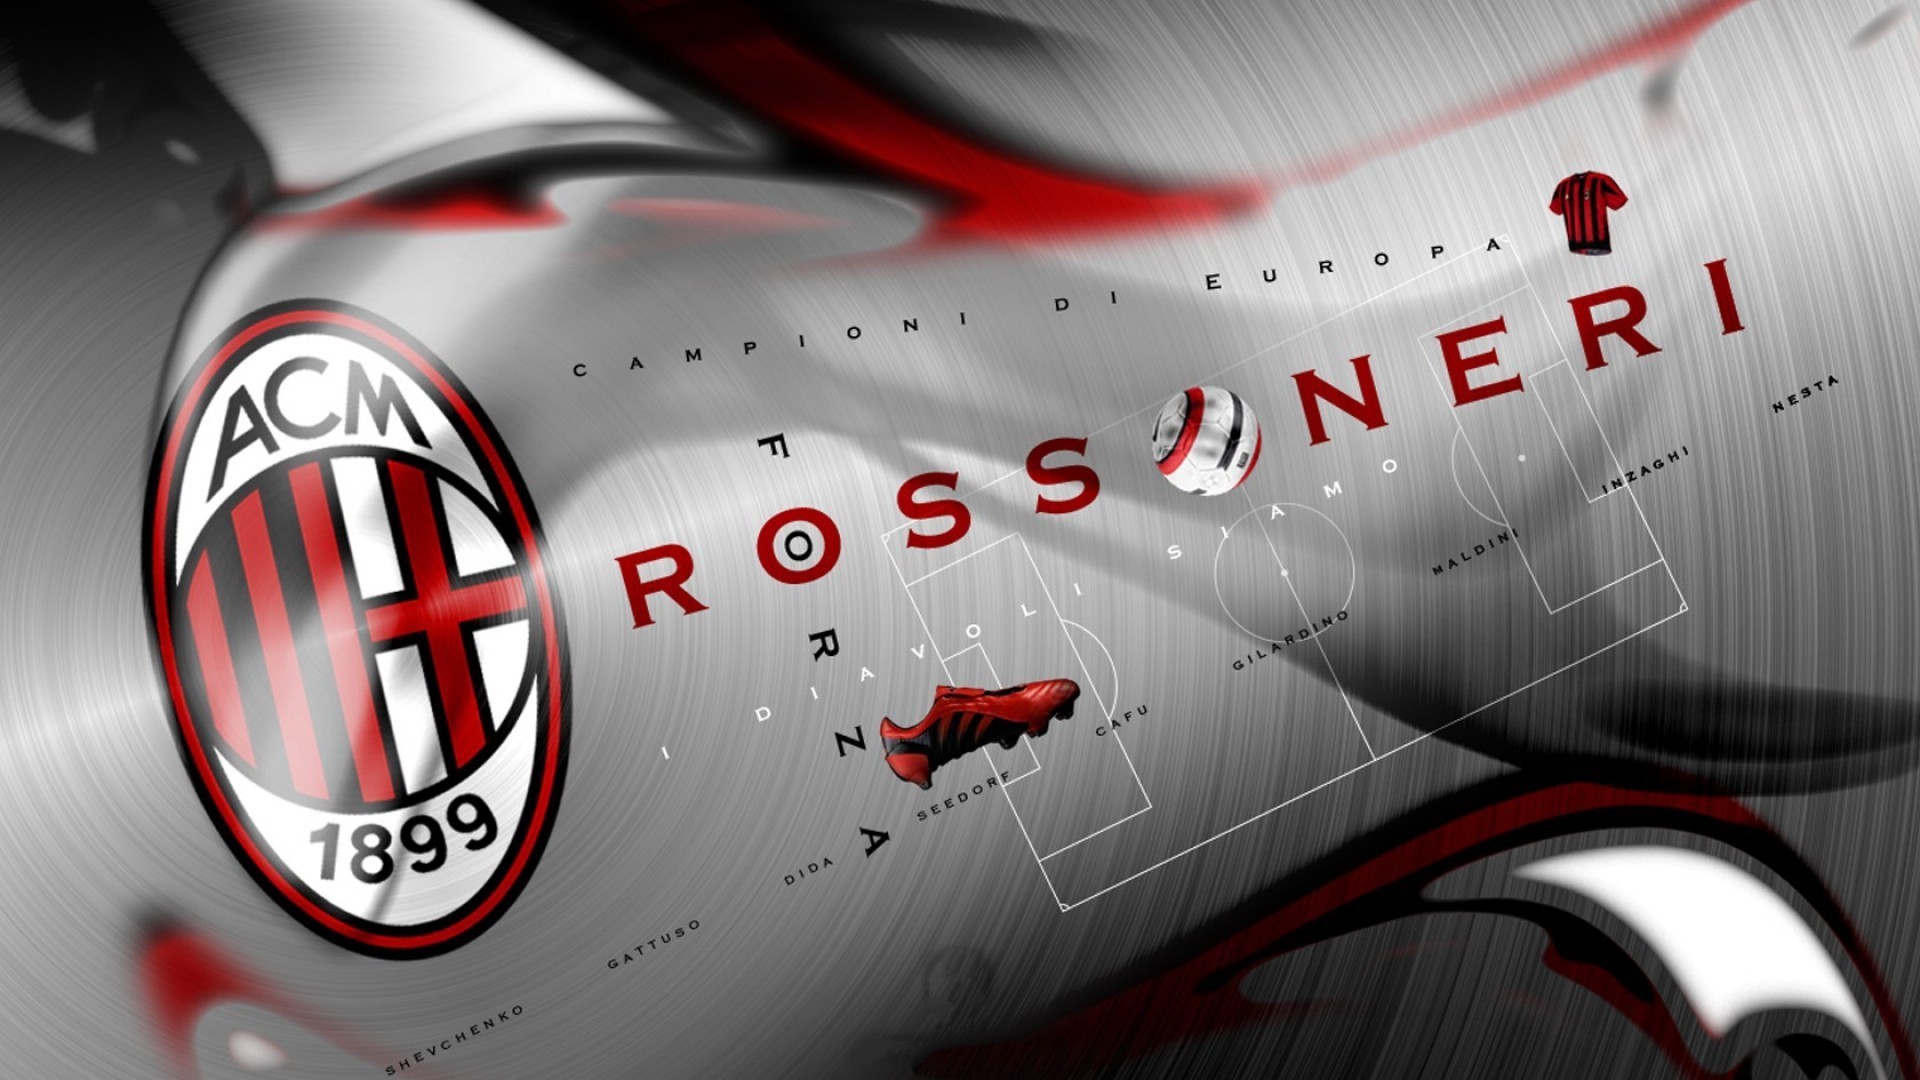 Wallpapers Milan With high-resolution 1920X1080 pixel. You can use this wallpaper for your Desktop Computers, Mac Screensavers, Windows Backgrounds, iPhone Wallpapers, Tablet or Android Lock screen and another Mobile device